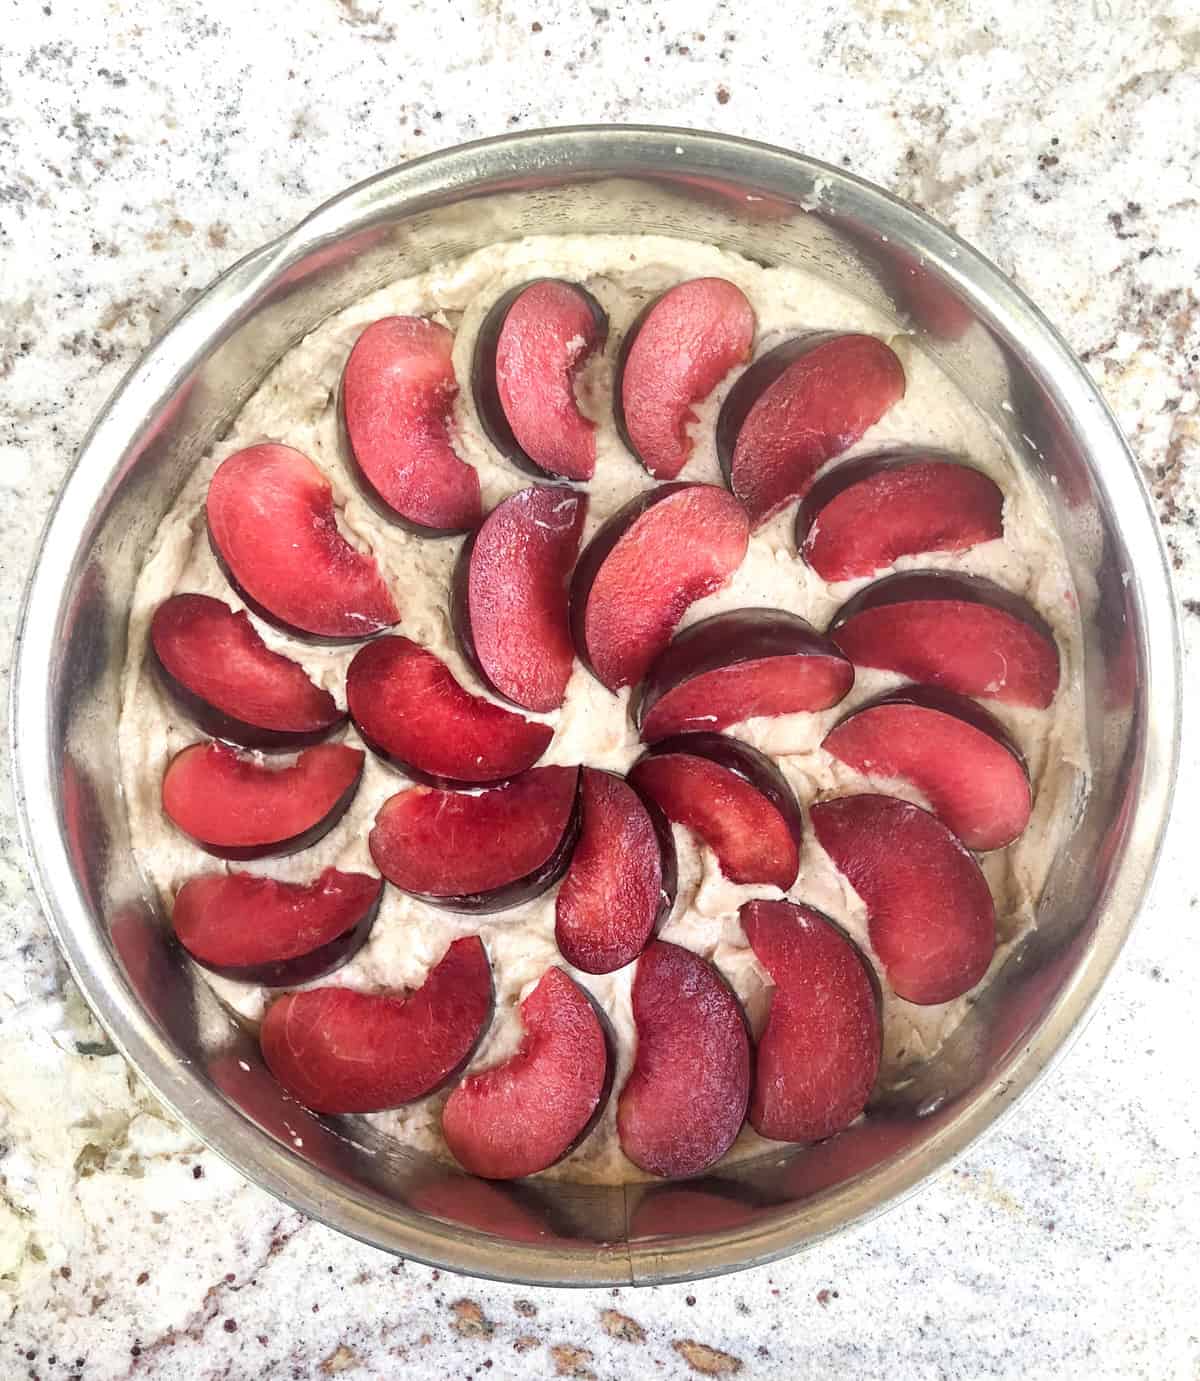 Arrange your quartered black plums in a beautiful pattern over the batter.